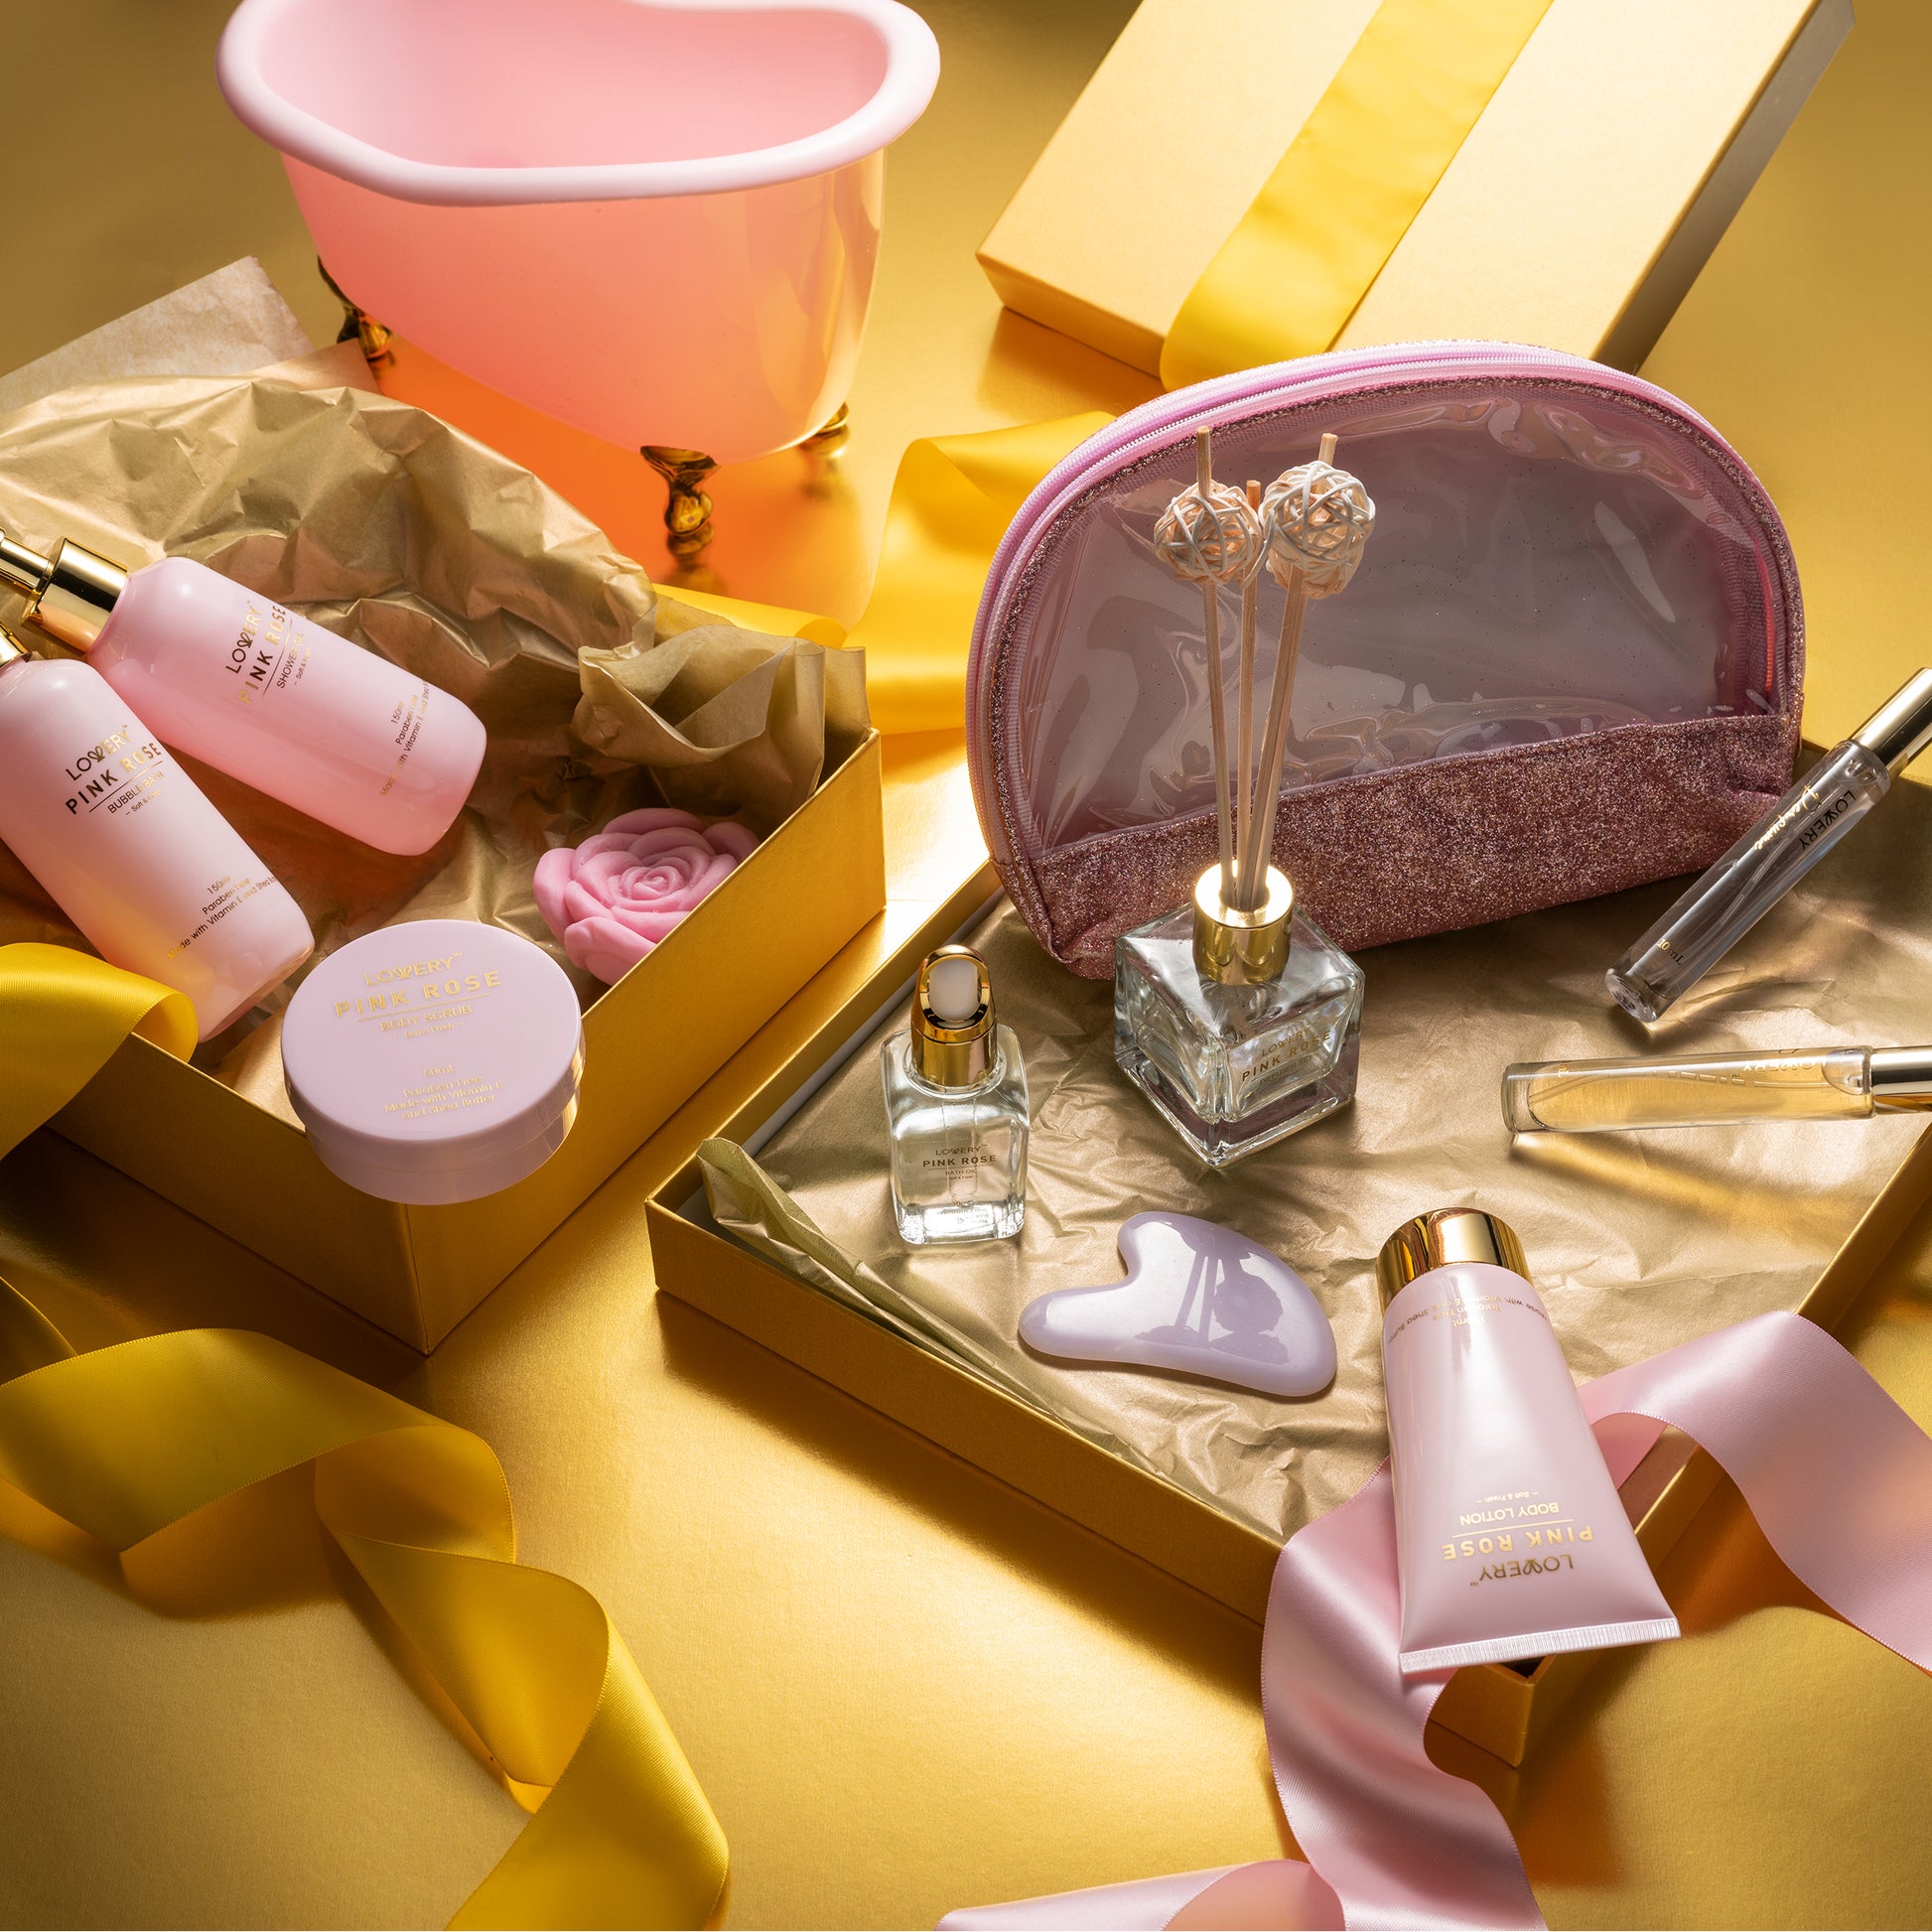 Victoria's Secret Pink Gift Wrapping Supplies